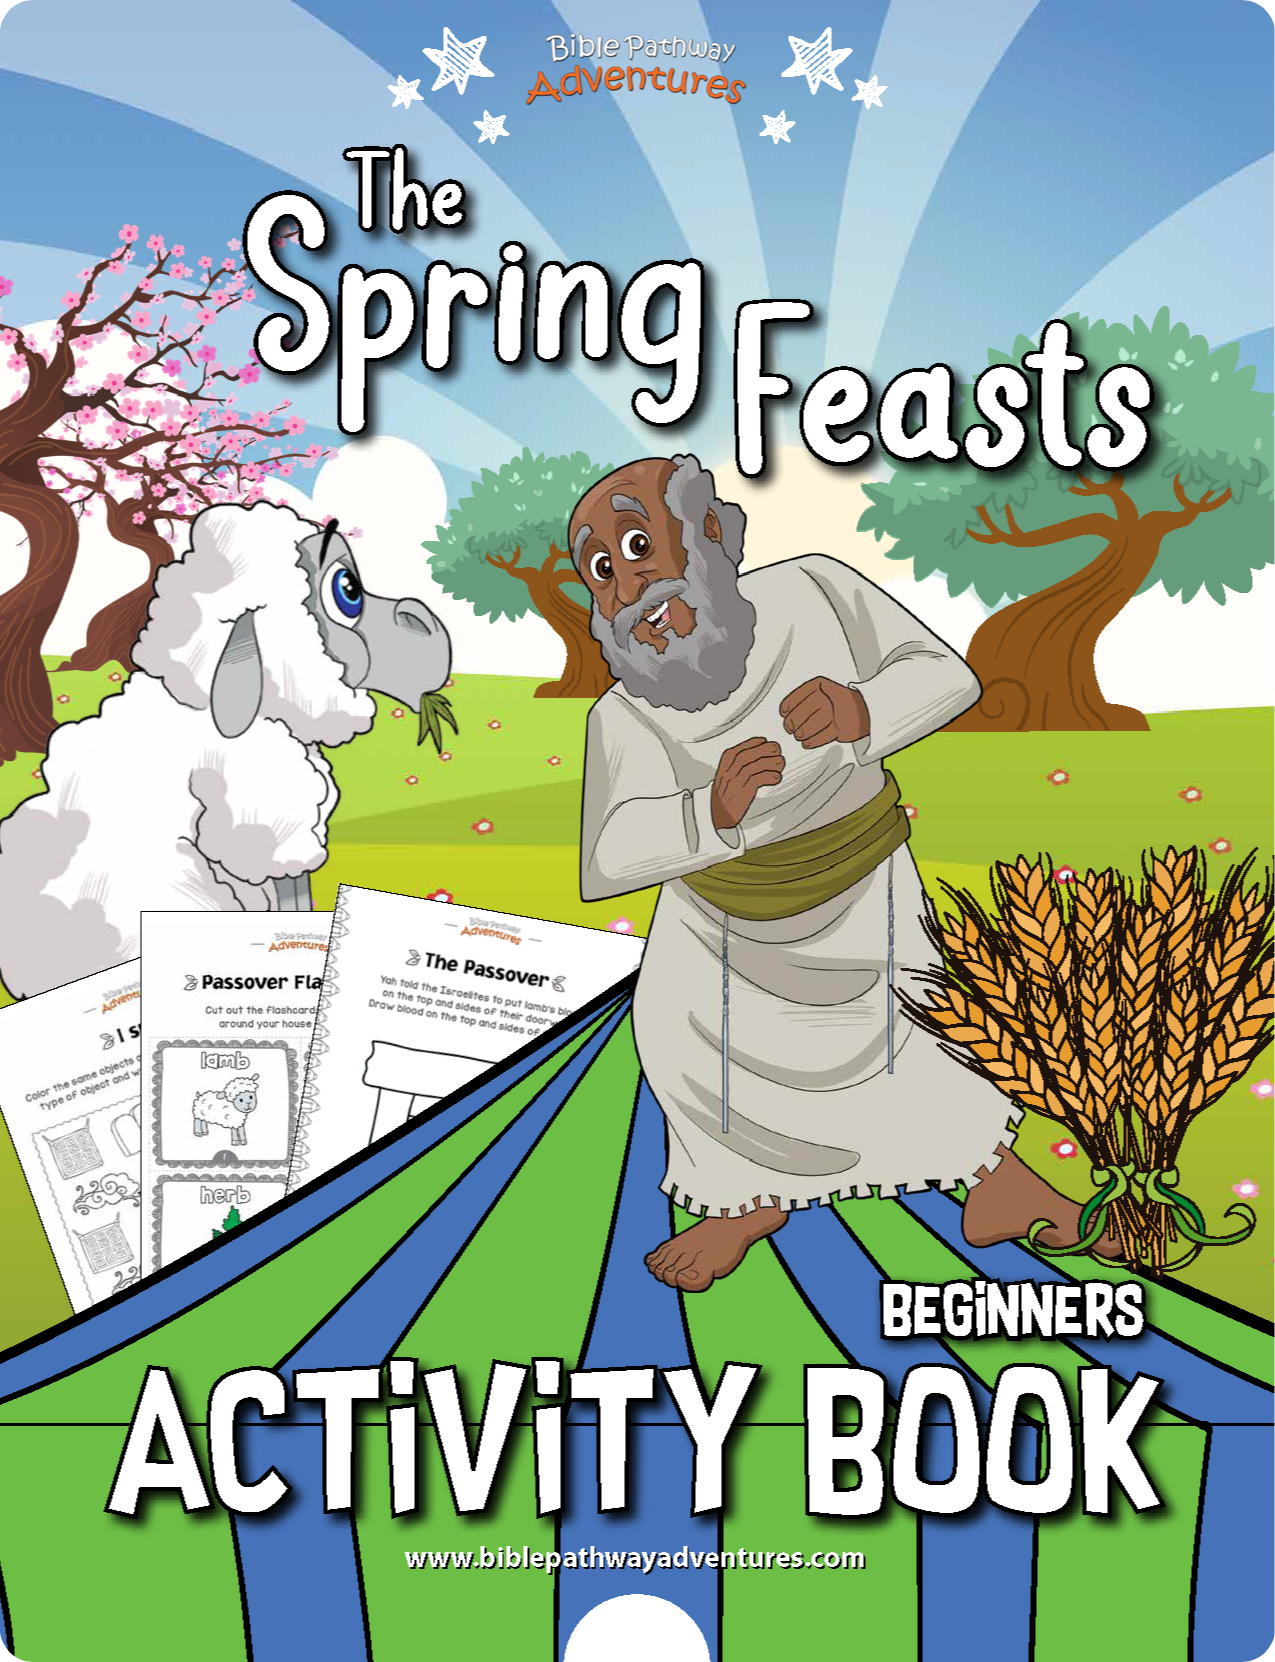 The Spring Feasts Activity Book for Beginners (PDF)